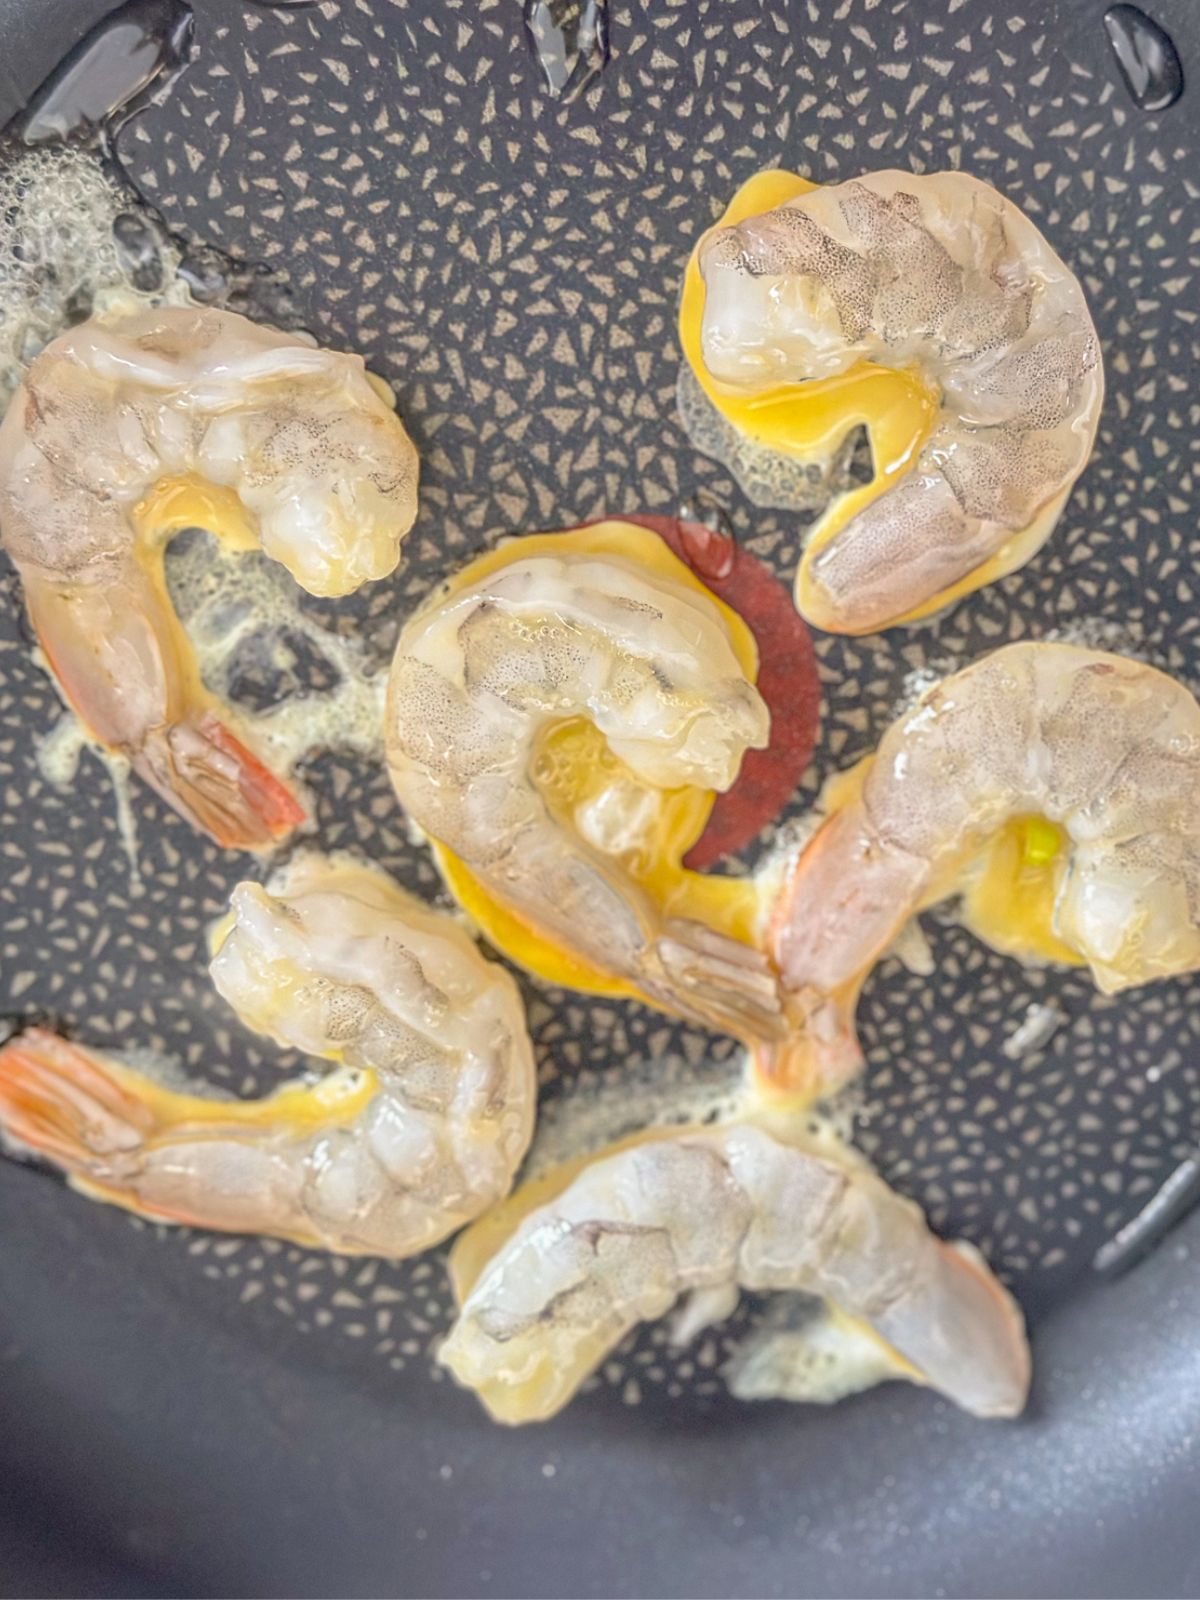 Shrimp sauteed in oil on a pan.